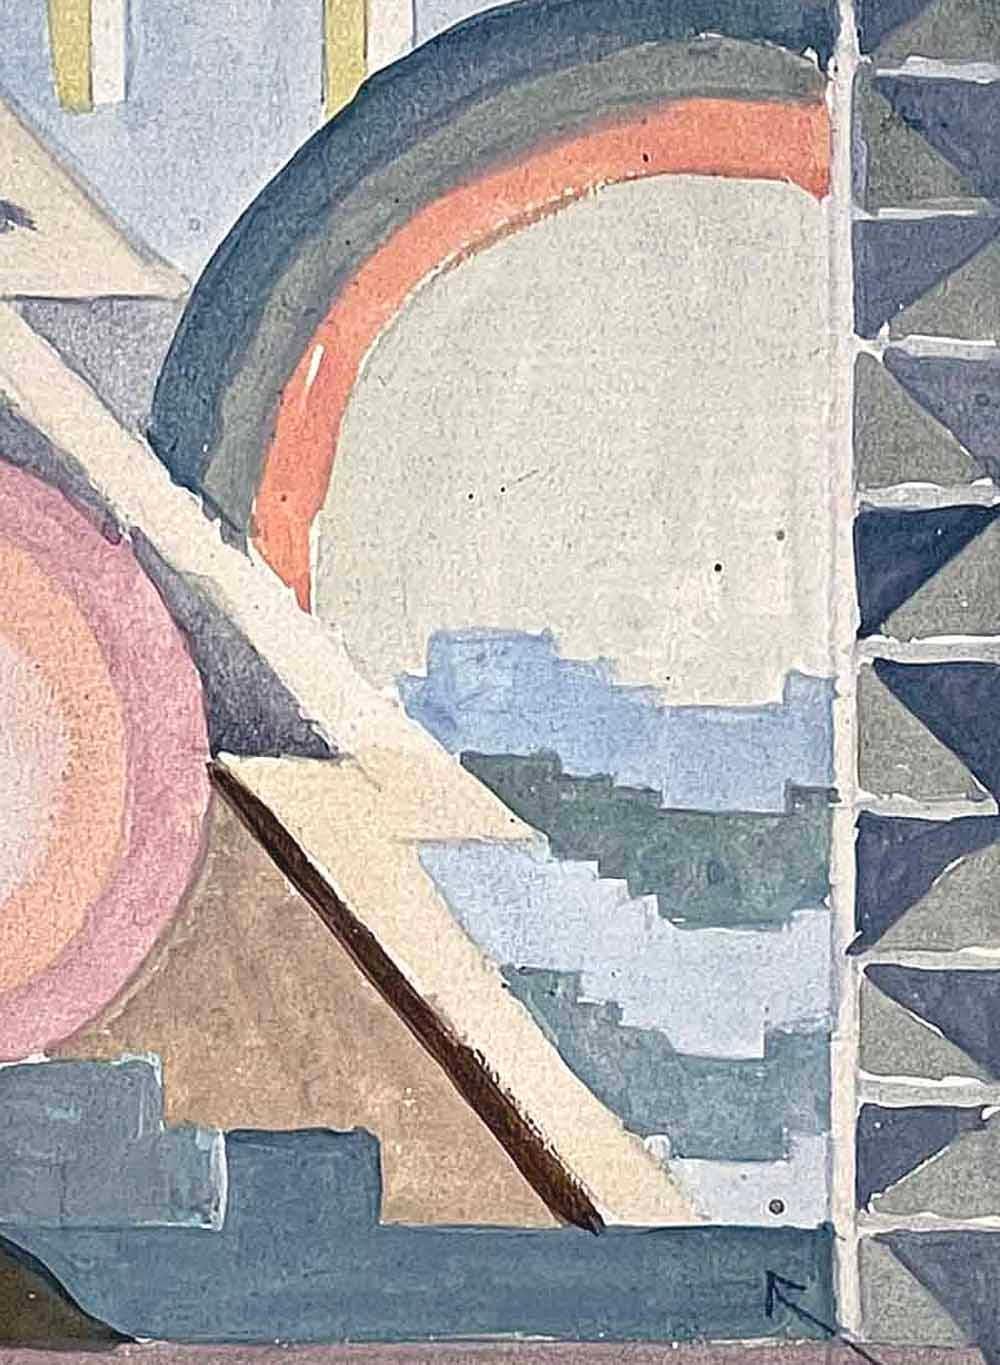 Highly stylized and rich with geometric forms -- including concentric circles, stacks of triangles and a lightning bolt motif -- this original painting was clearly made for an Art Deco rug design in the 1920s or 30s.  Bohm grew up in Bohemia and was